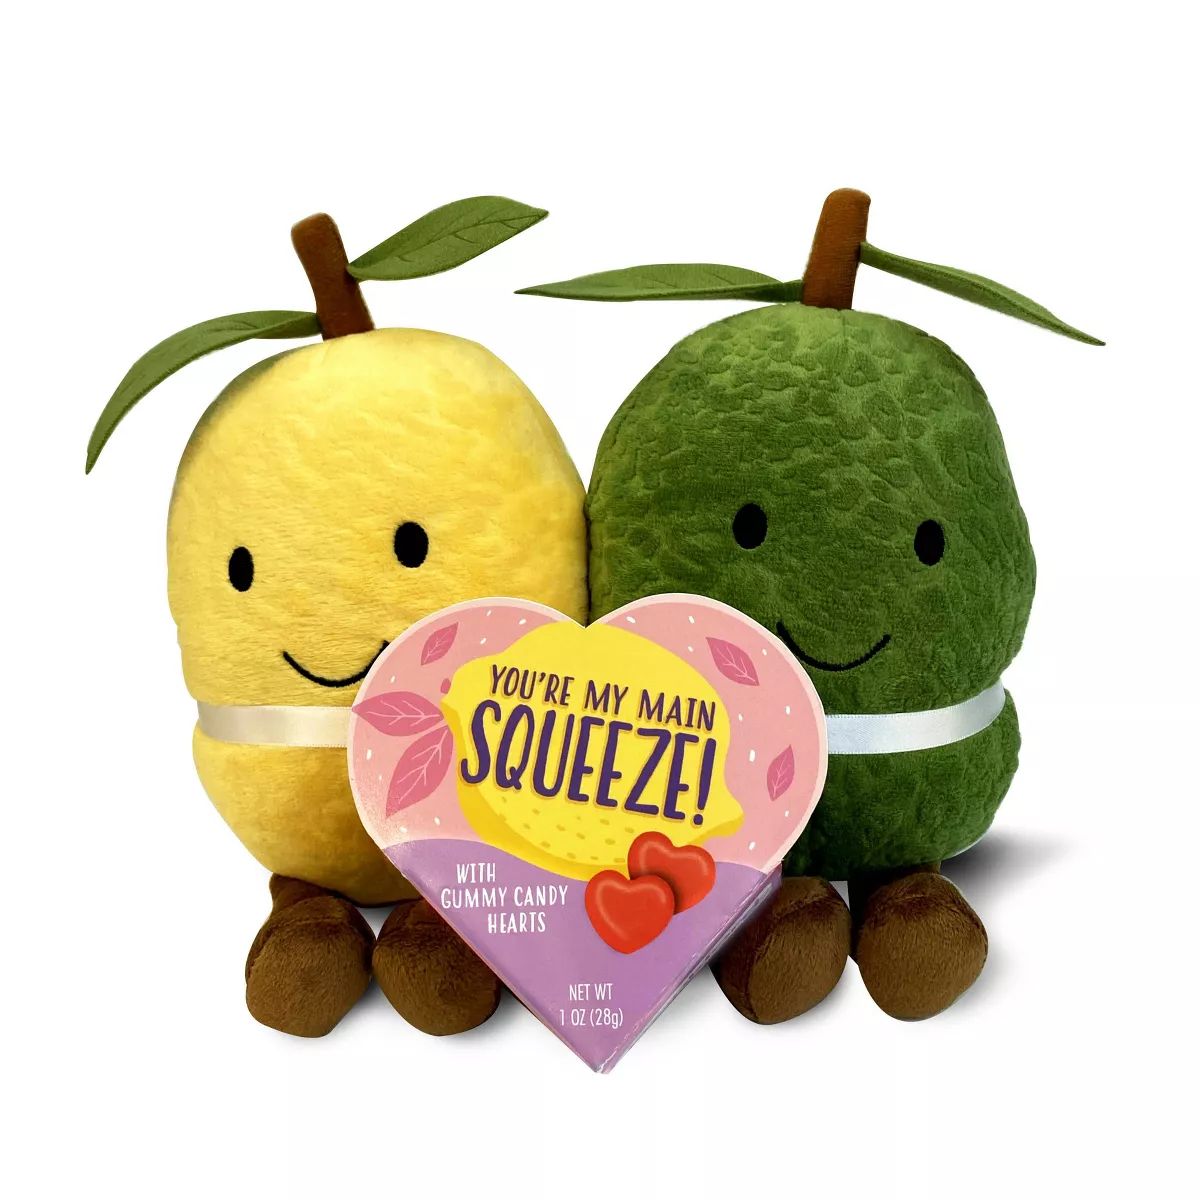 Frankford Valentine's Main Squeeze Date Night Plush with Gummy Candy Hearts - 1oz | Target